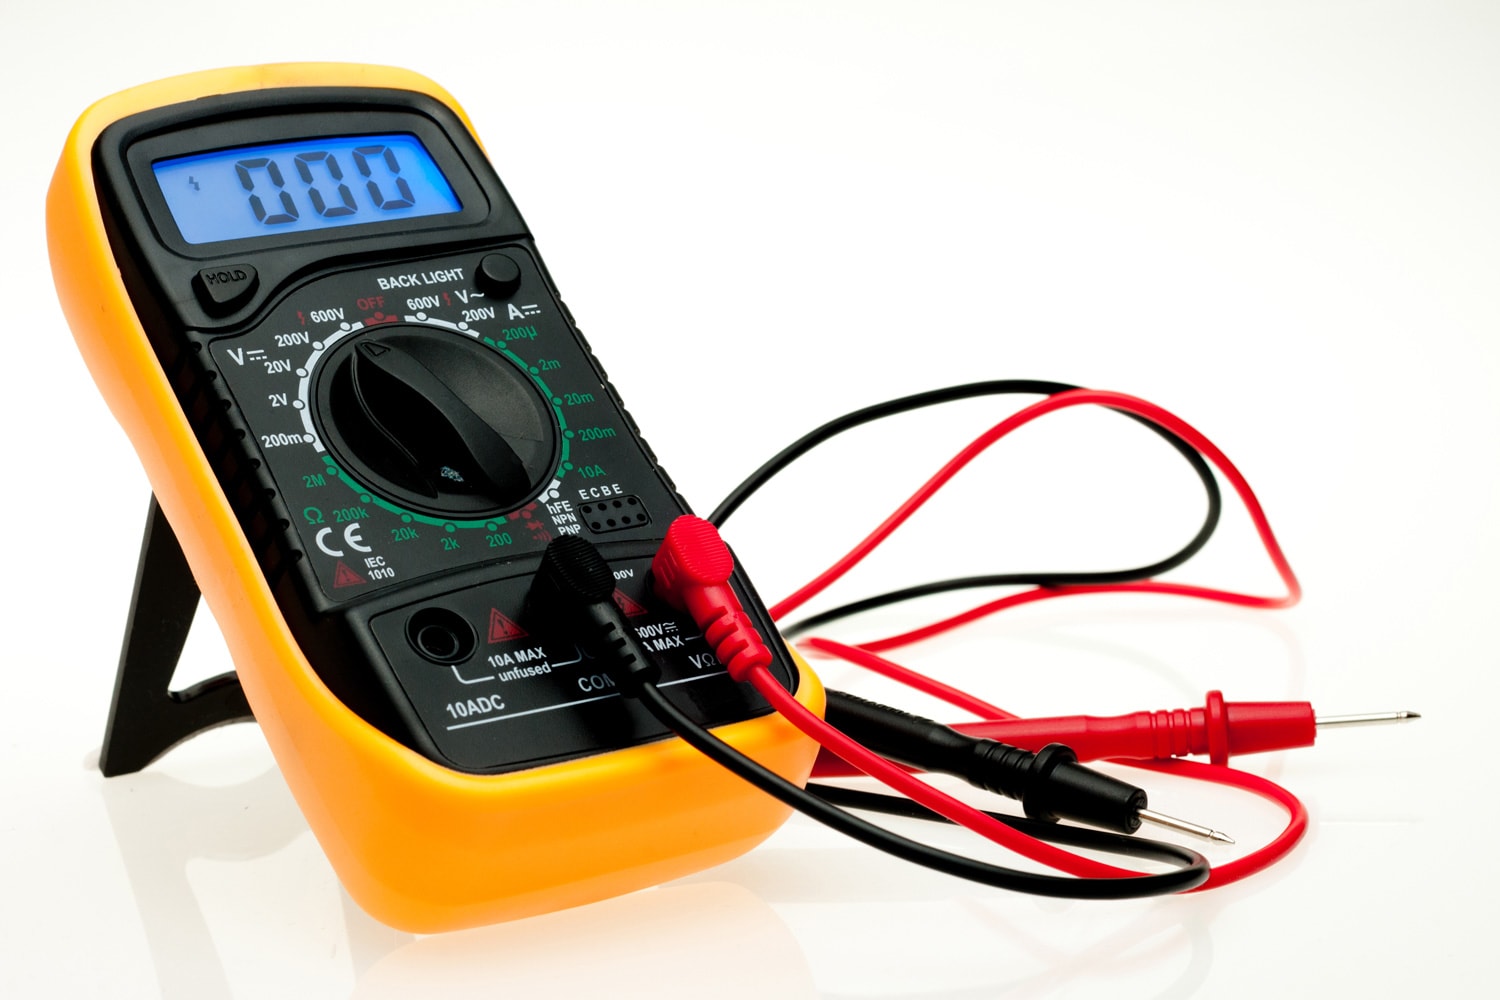 Digital multimeter with probes and blue backlit display on a white background